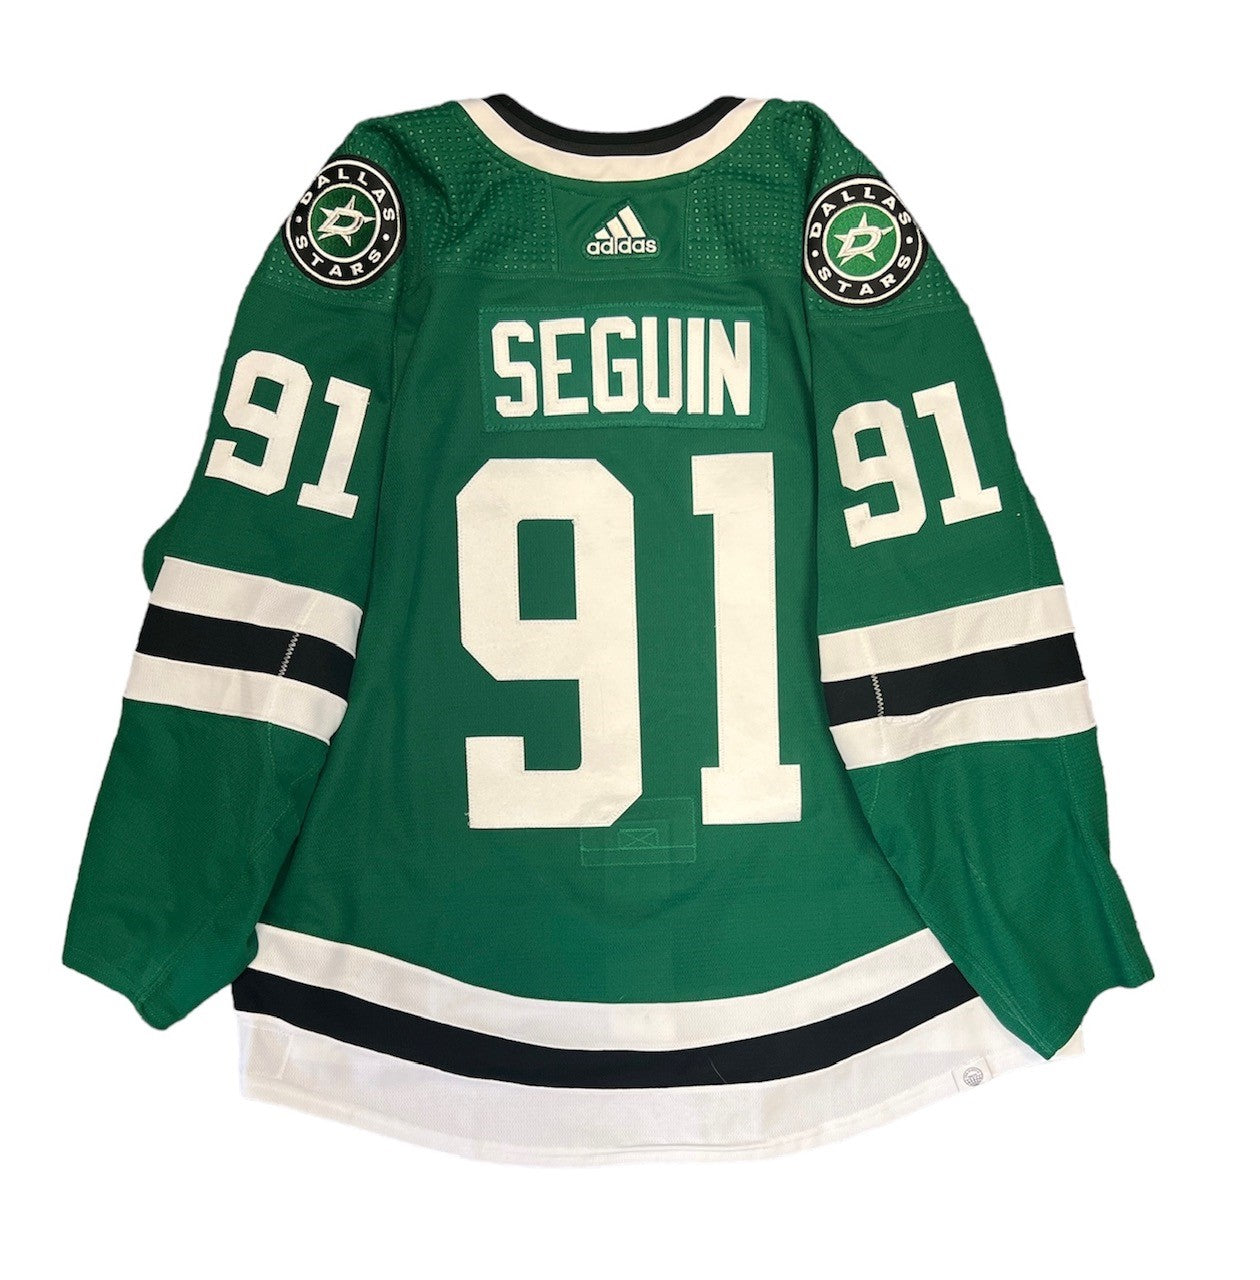 Stars Hangar - Dallas Stars #ReverseRetro jersey info ⬇ ▫ General public  pre-sale begins Wednesday at 10 a.m. CT at  ▫  Victory Club Members will receive priority pre-sale access beginning Tuesday